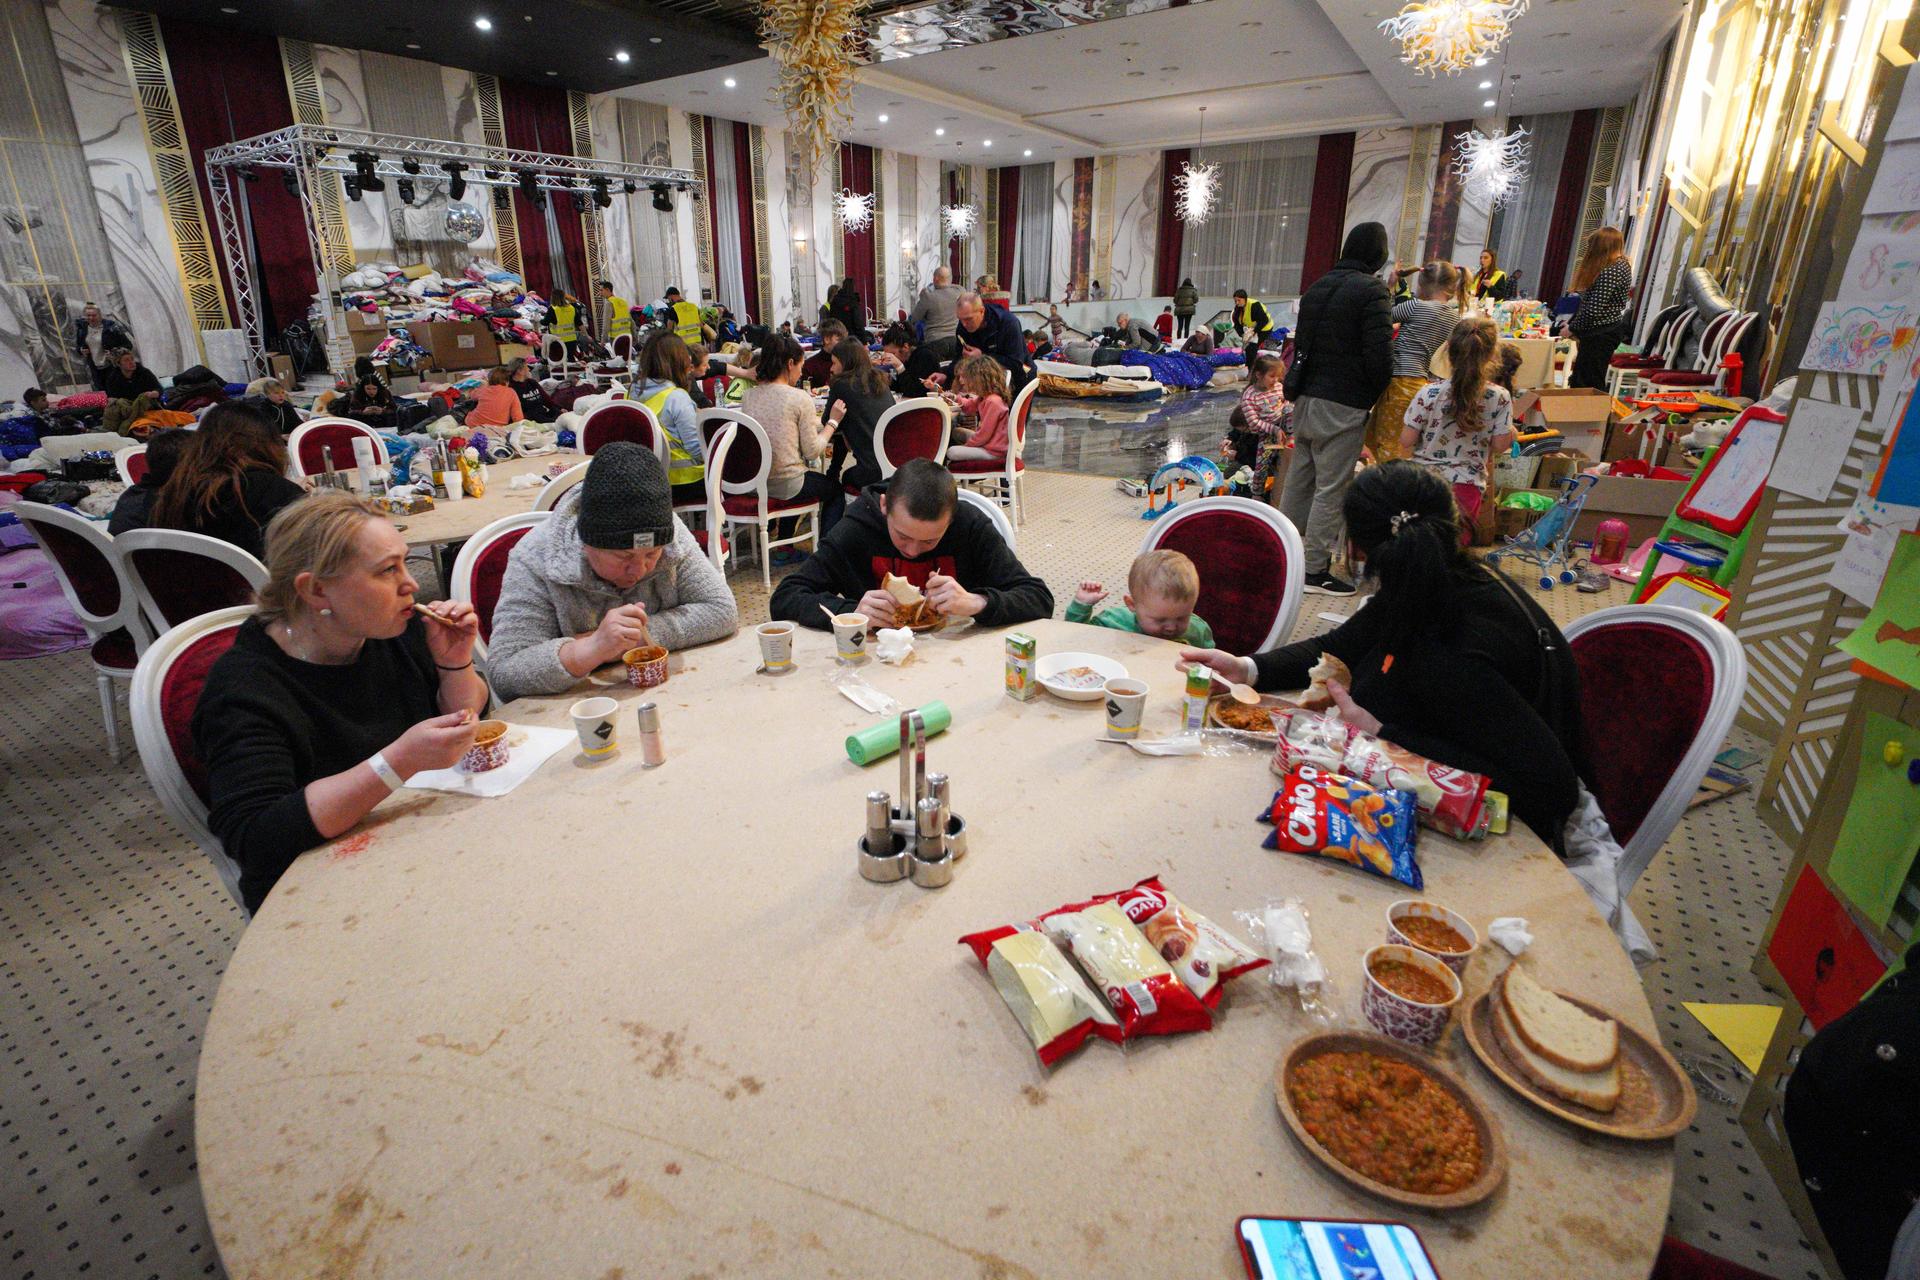 In the town of Suceava, Romania, the Mandachi Hotel and Spa, a four-star hotel converted its ballroom into a temporary shelter, serving food and other supplies to Ukrainian refugees.